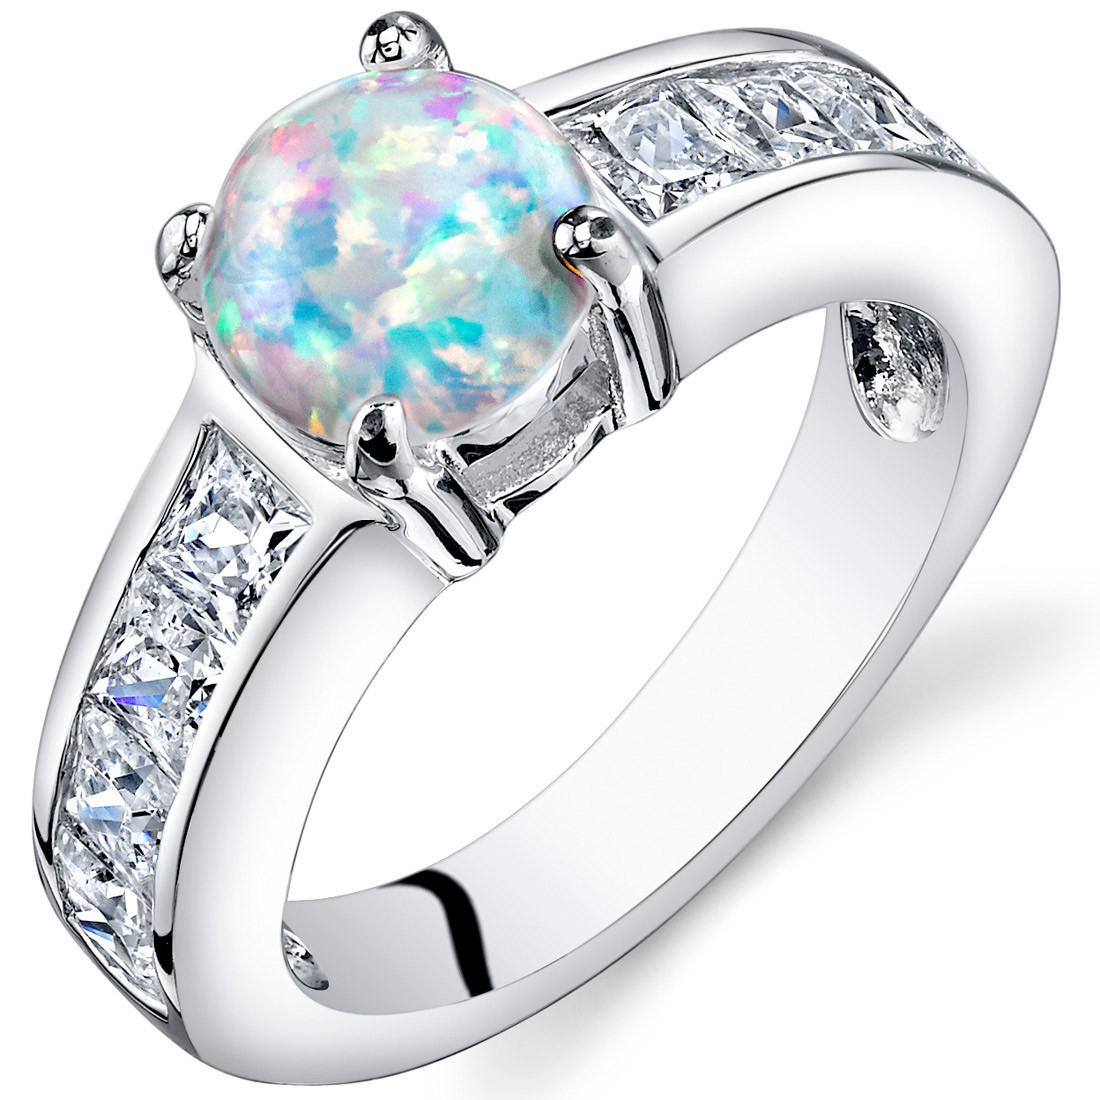 Opal Engagement Ring Sterling Silver 1.25 Cts Sizes 5 to 9 SR11160